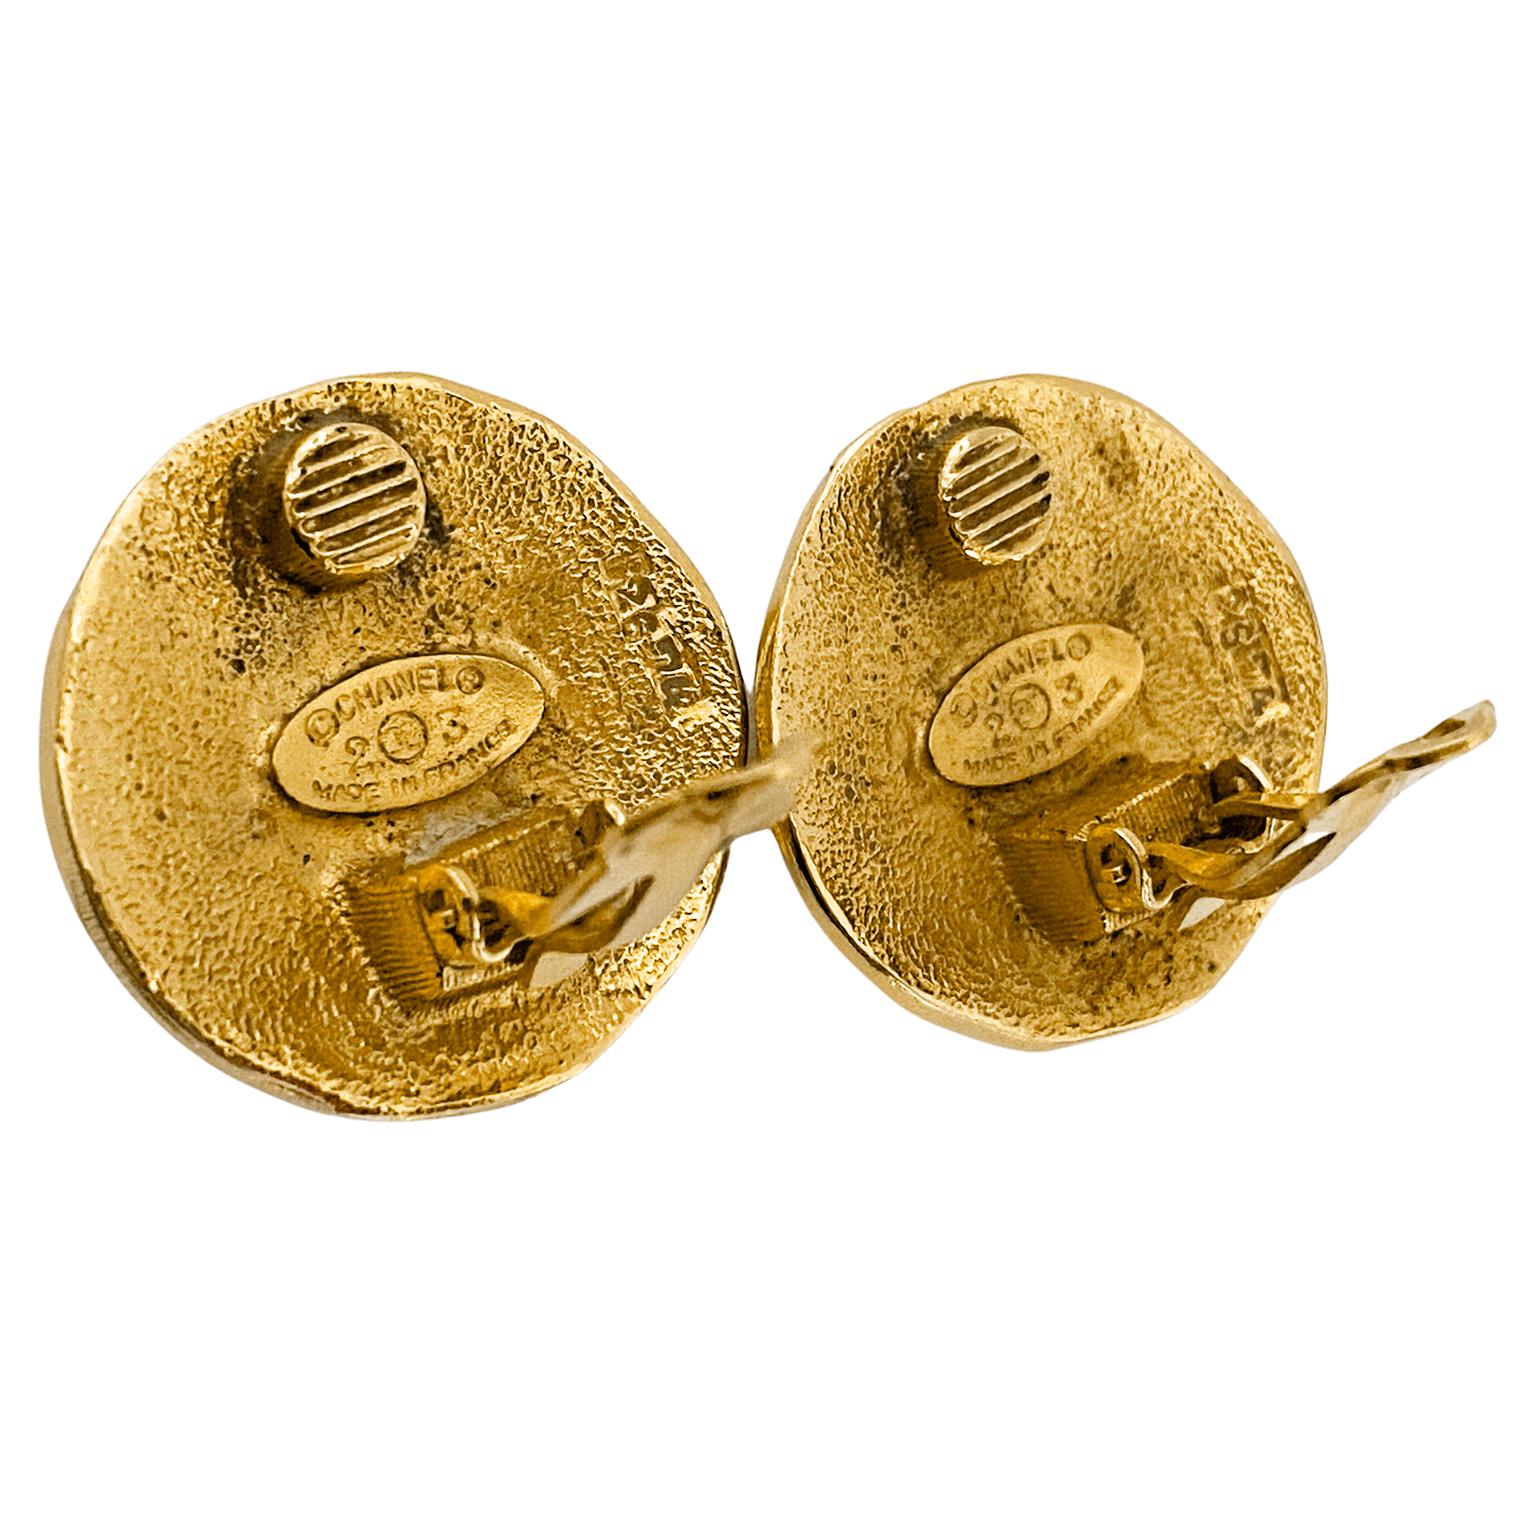 Beautiful Chanel gold tone clip on earrings featuring a lion motif and the Chanel brand markings. Back brand plaques are stamped collection 23, dating these earrings to 1984, the first year that Karl Largerfeld hired Victoire de Castallane to design